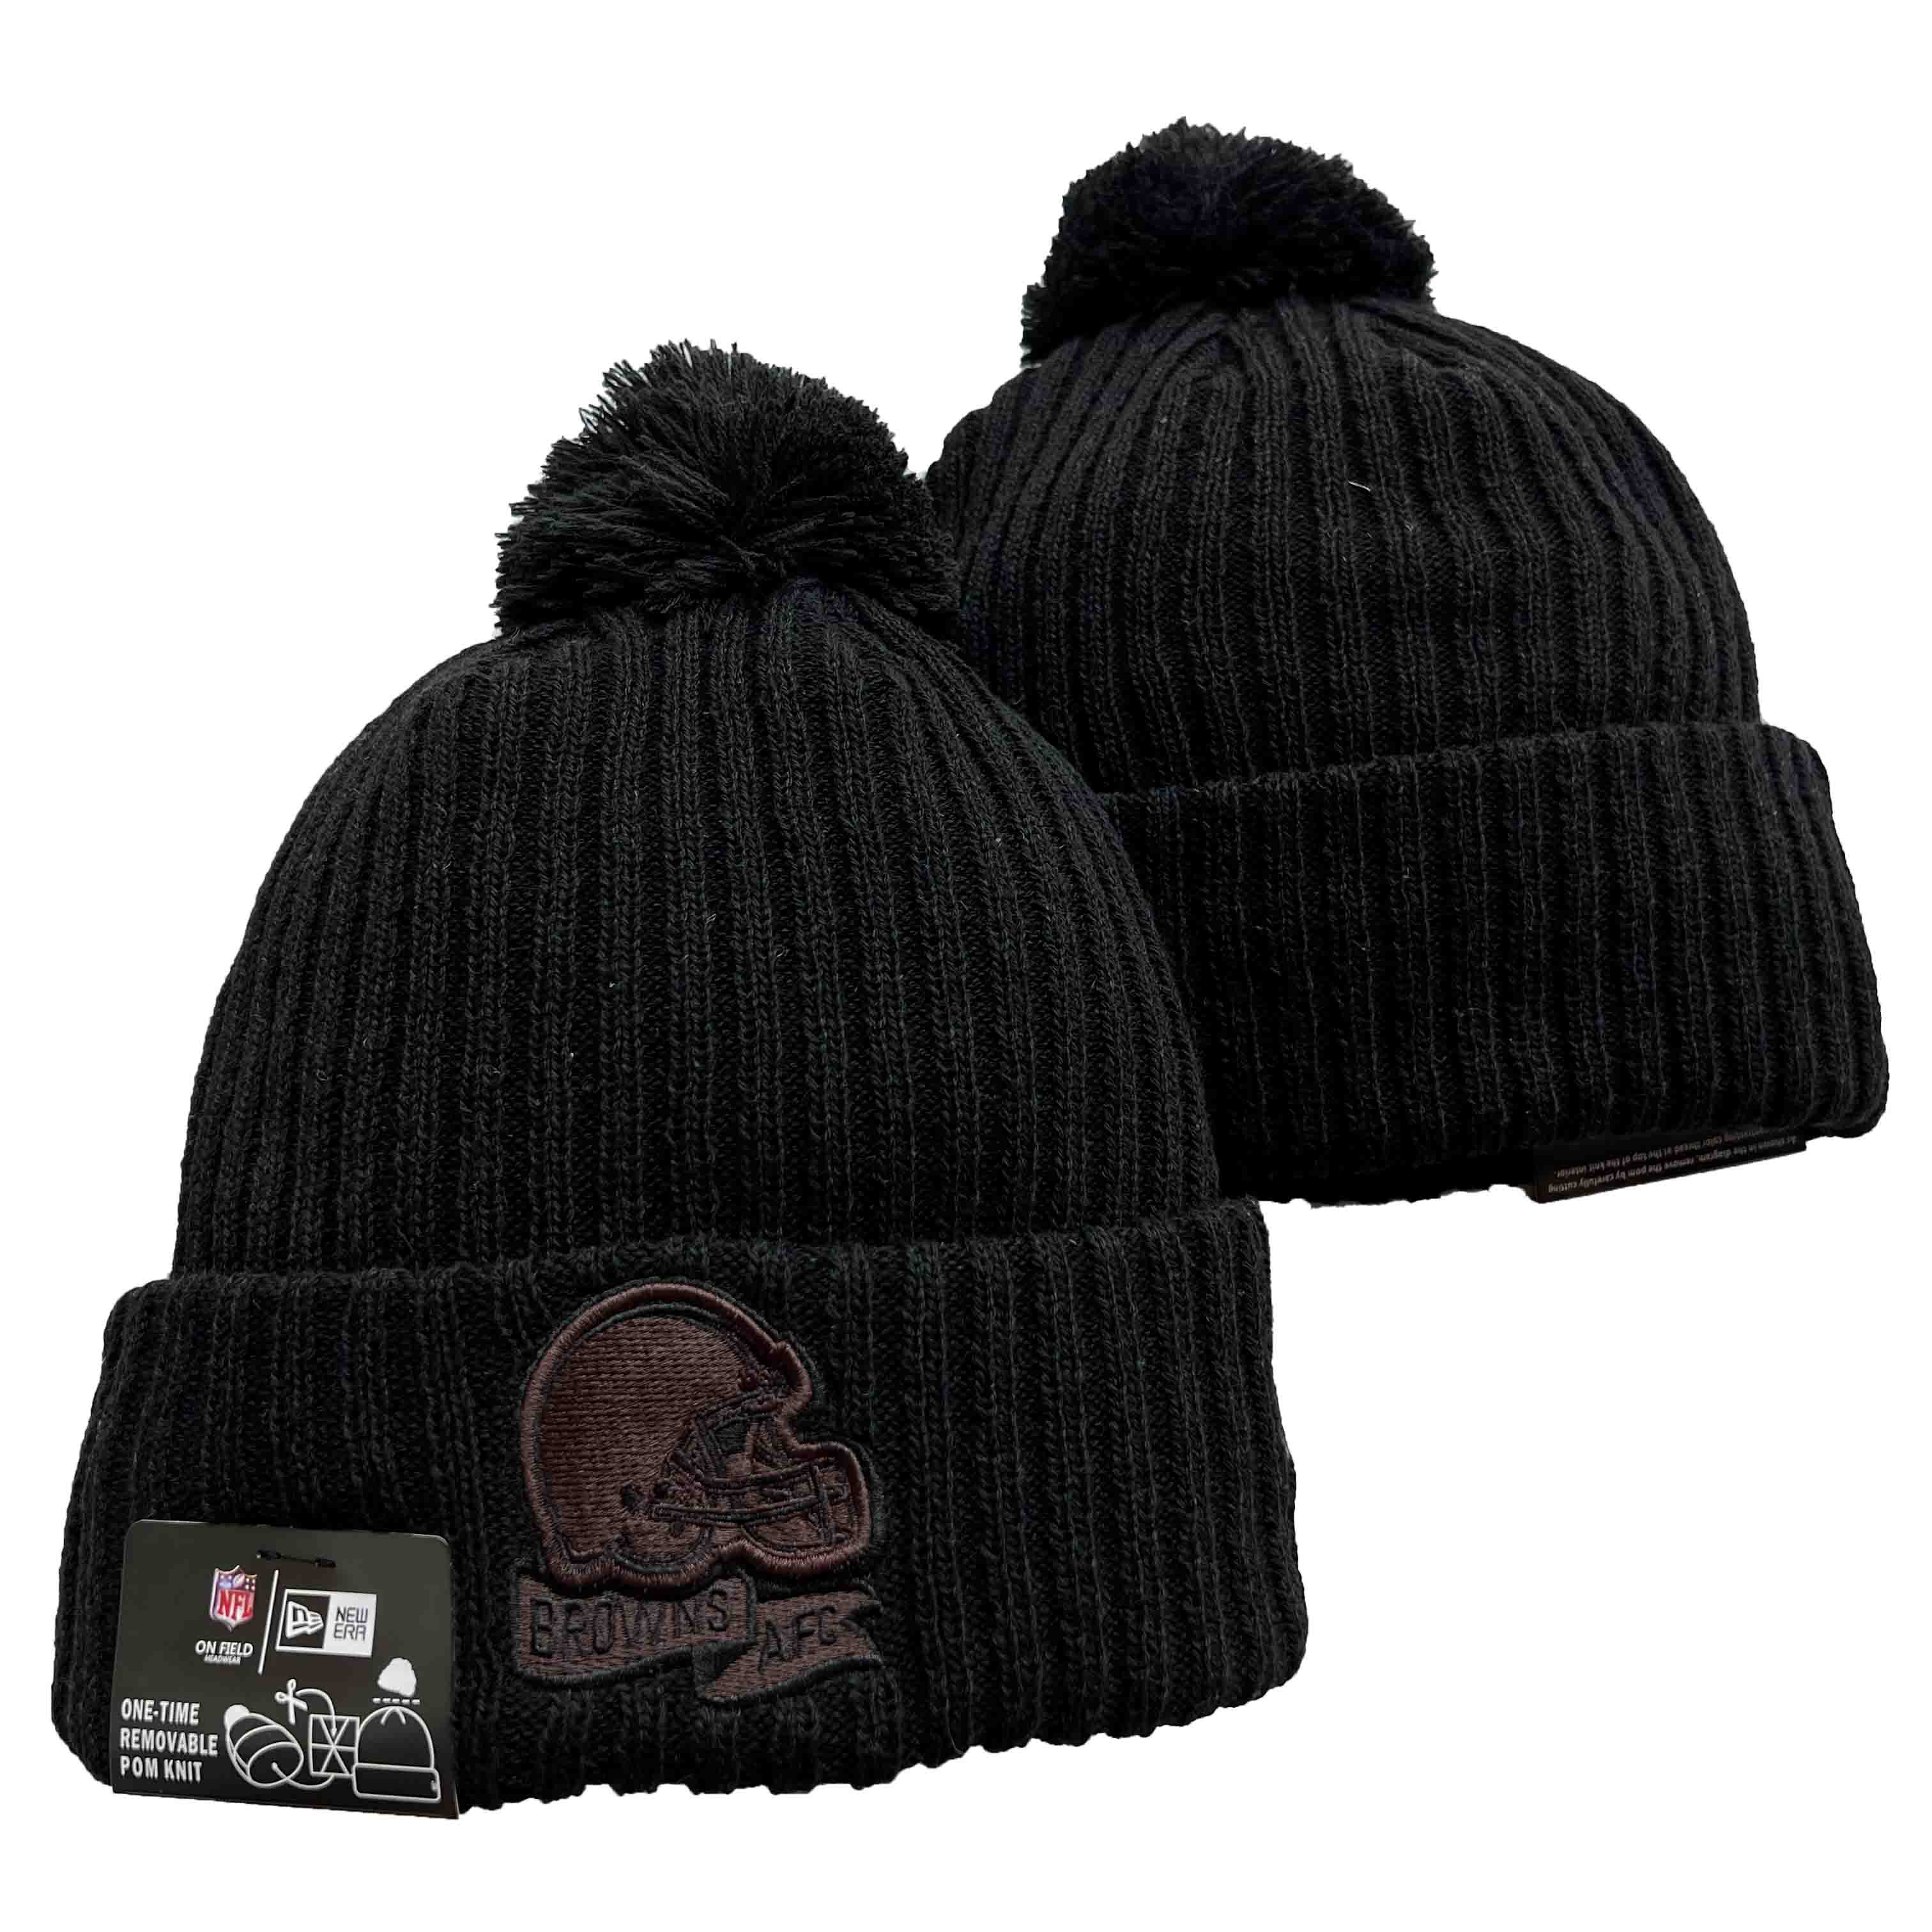 NFL Cleveland Browns Beanies Knit Hats-YD1301